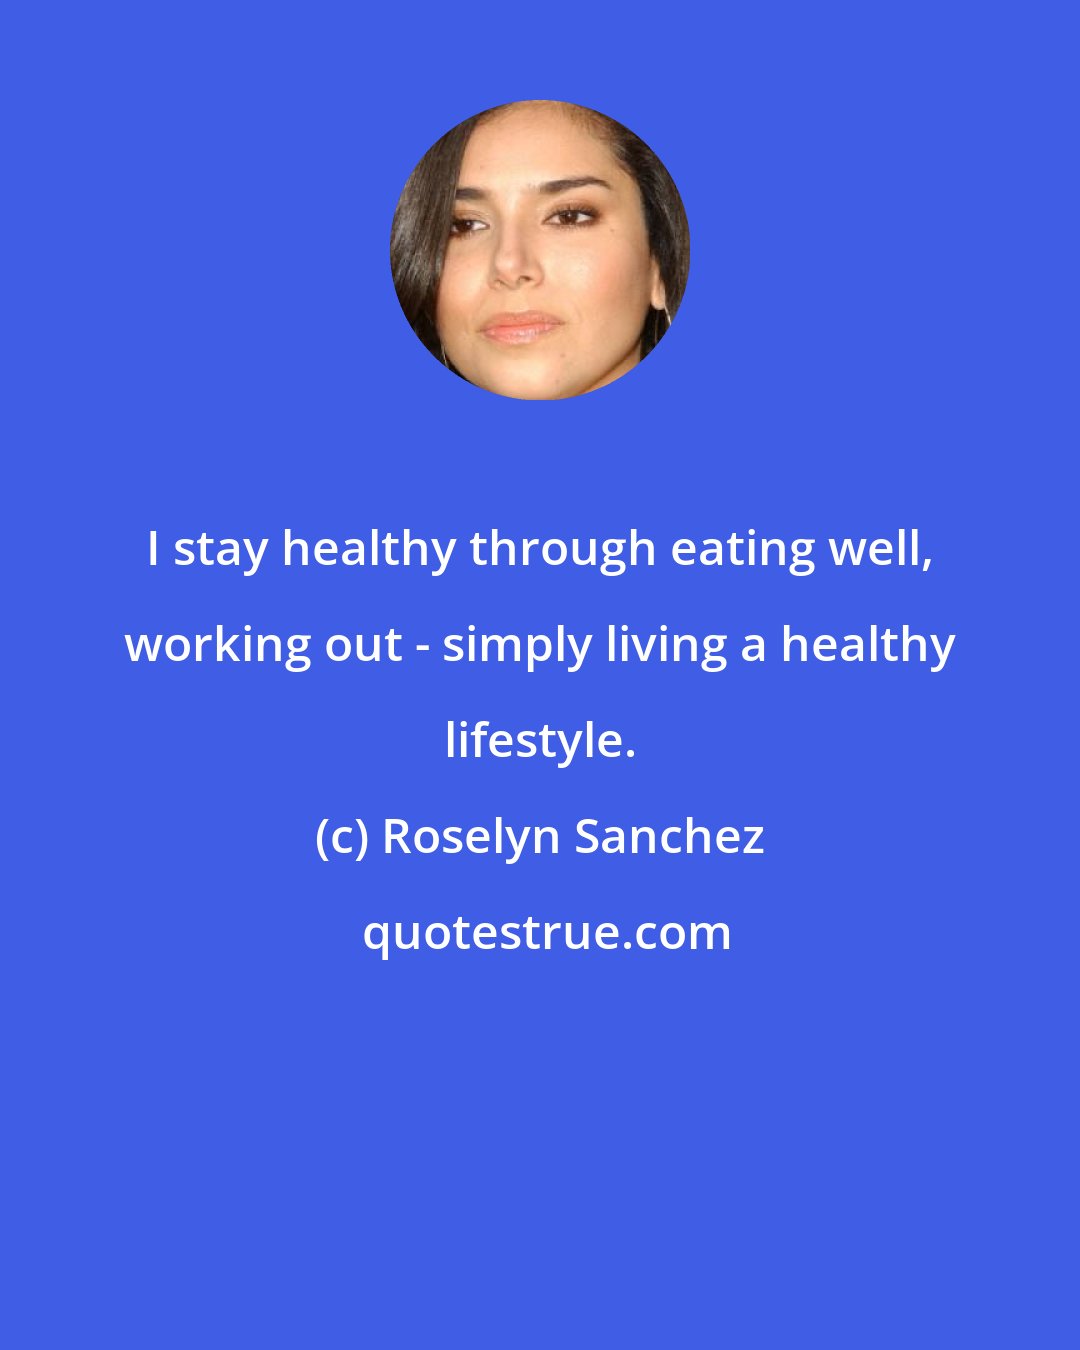 Roselyn Sanchez: I stay healthy through eating well, working out - simply living a healthy lifestyle.